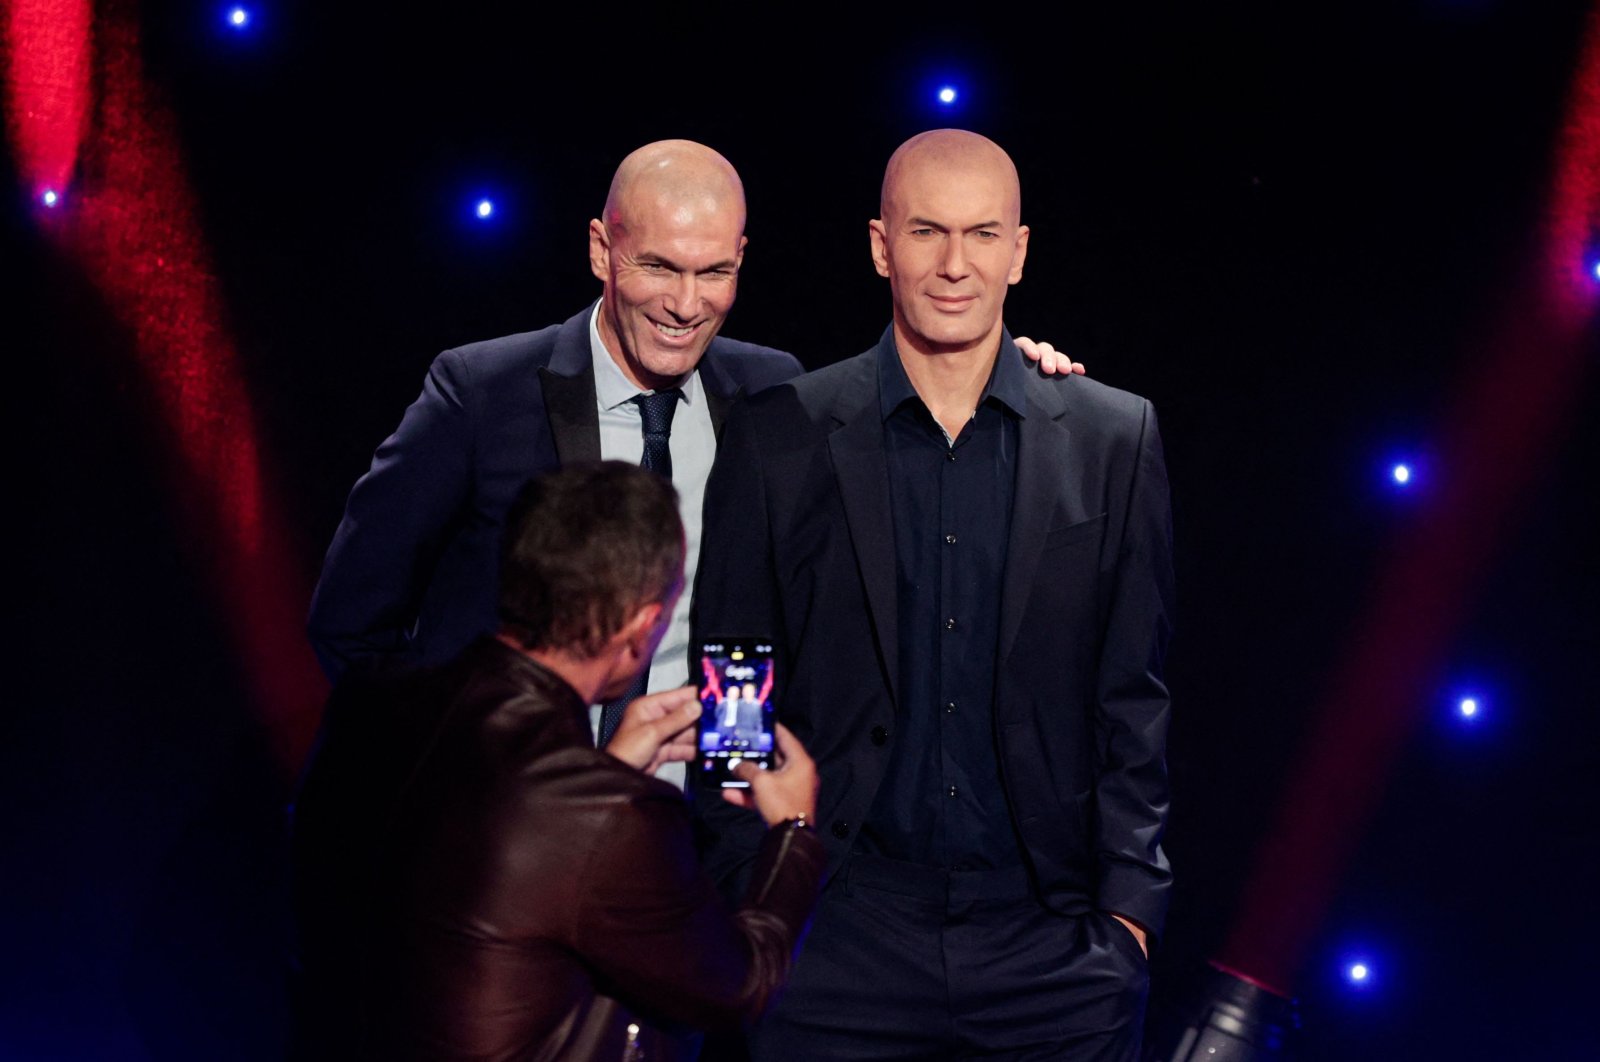 French former forward football player Zinedine Zidane poses next to his new wax statue at the Musee Grevin, Paris, France, Oct. 24, 2022. (AFP Photo)